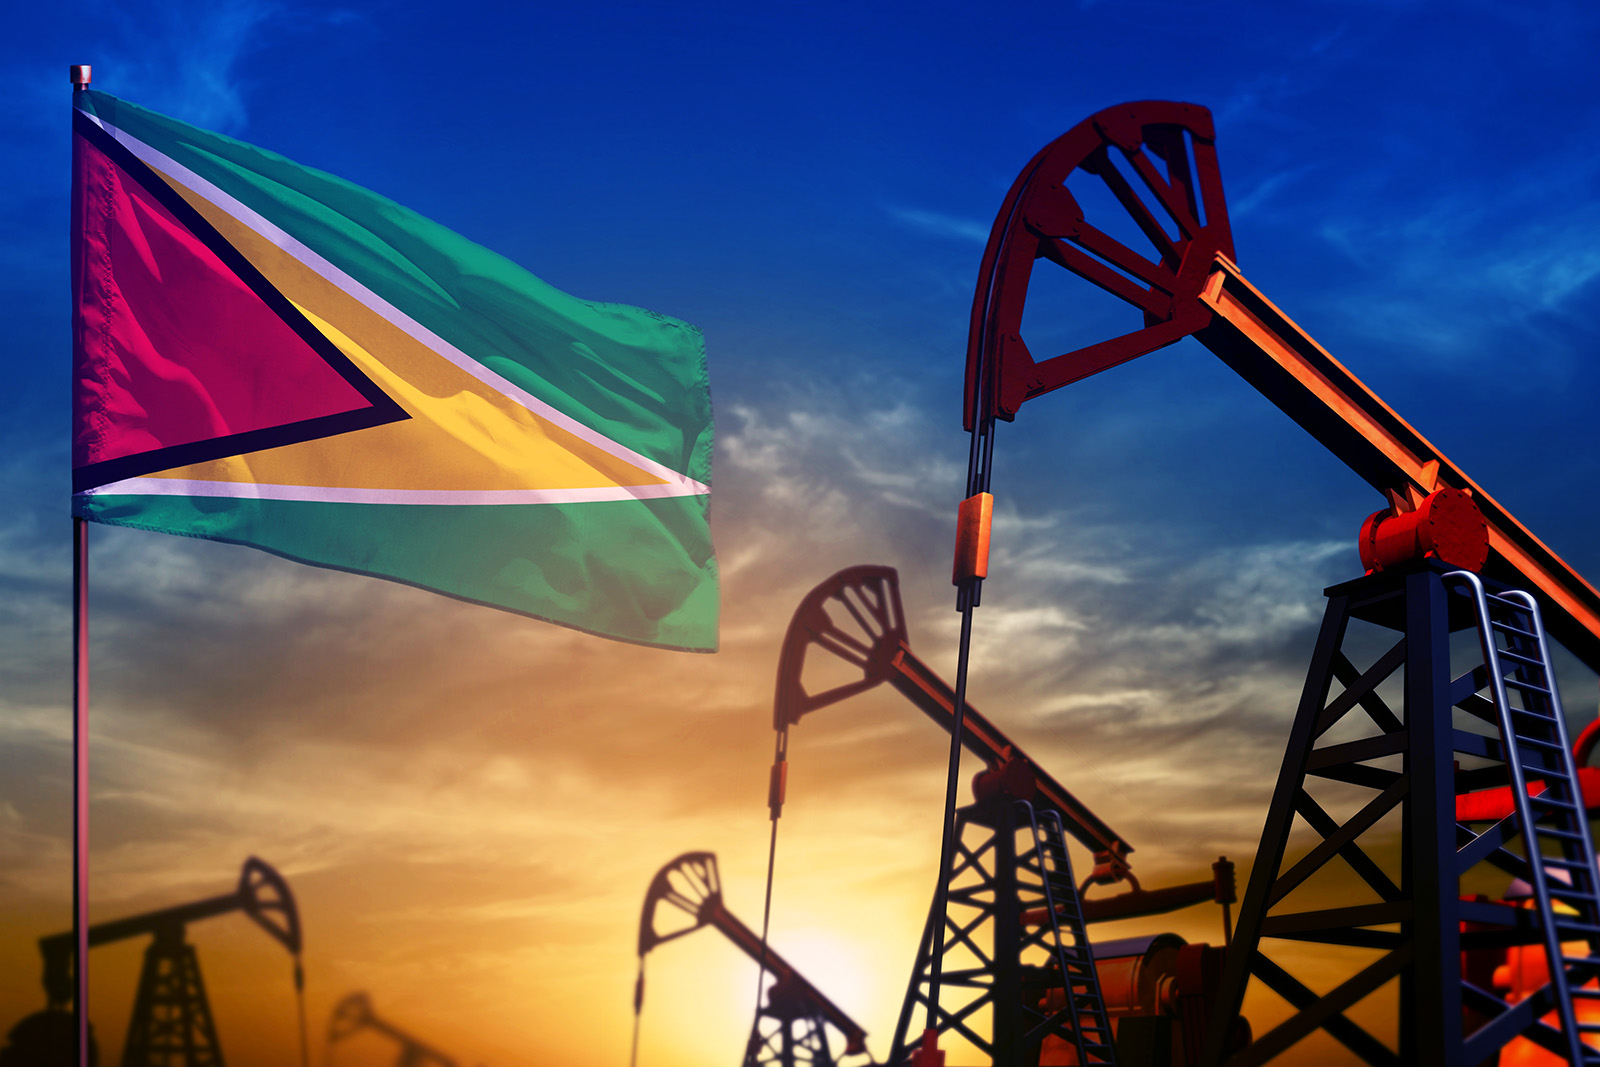 Guyana, a country of just 780,000 people, is on track to become the second or third largest oil producer in the western hemisphere over the next 20-40 years. 